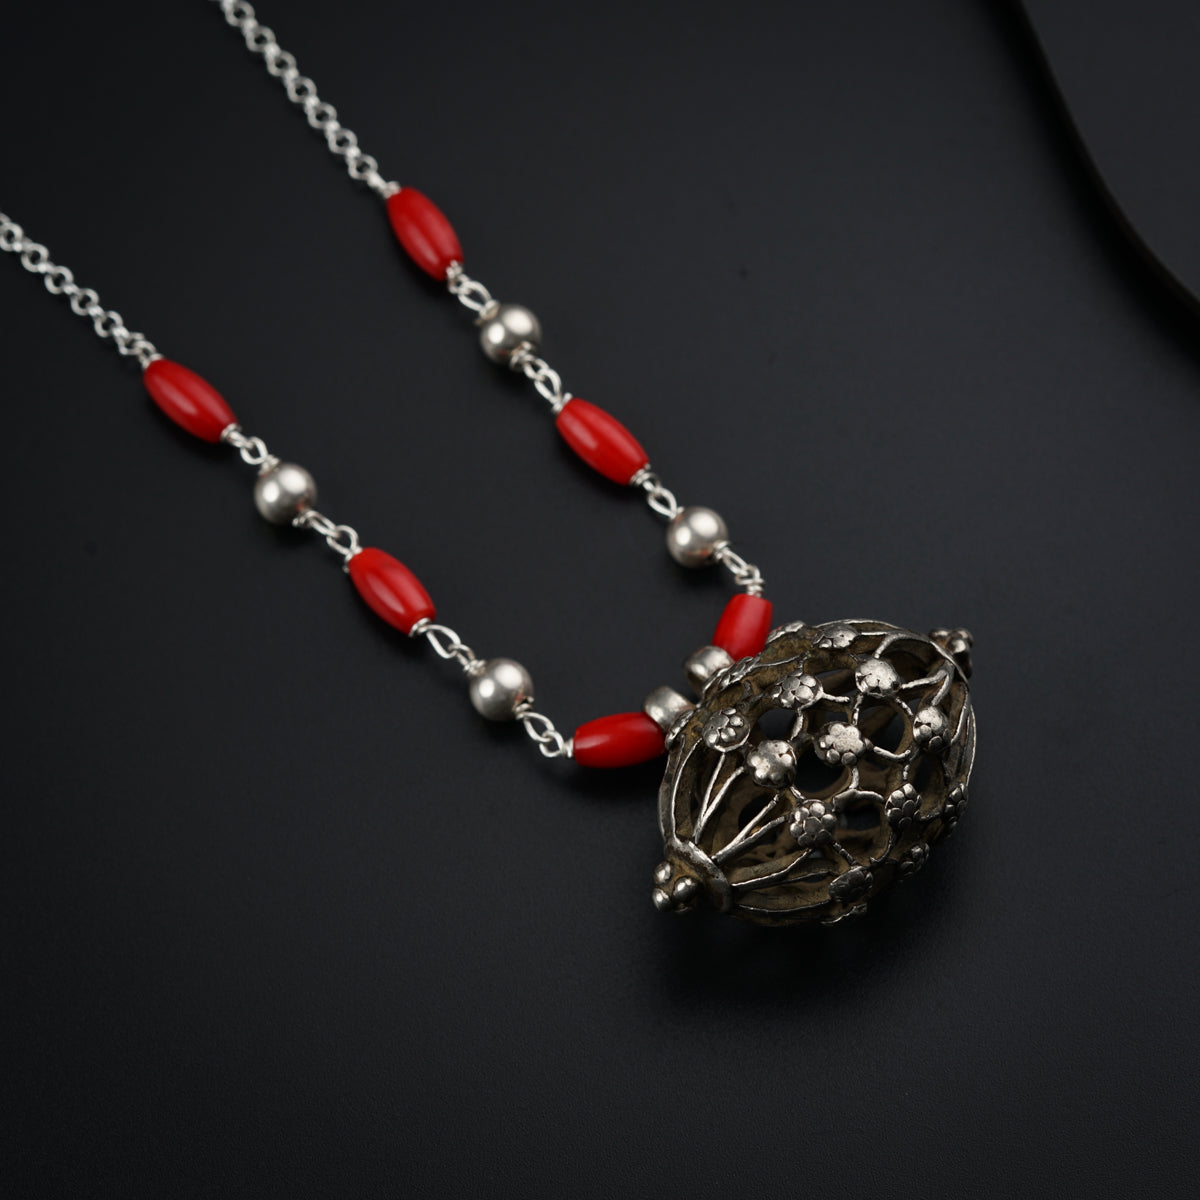 a necklace with a red bead and silver beads